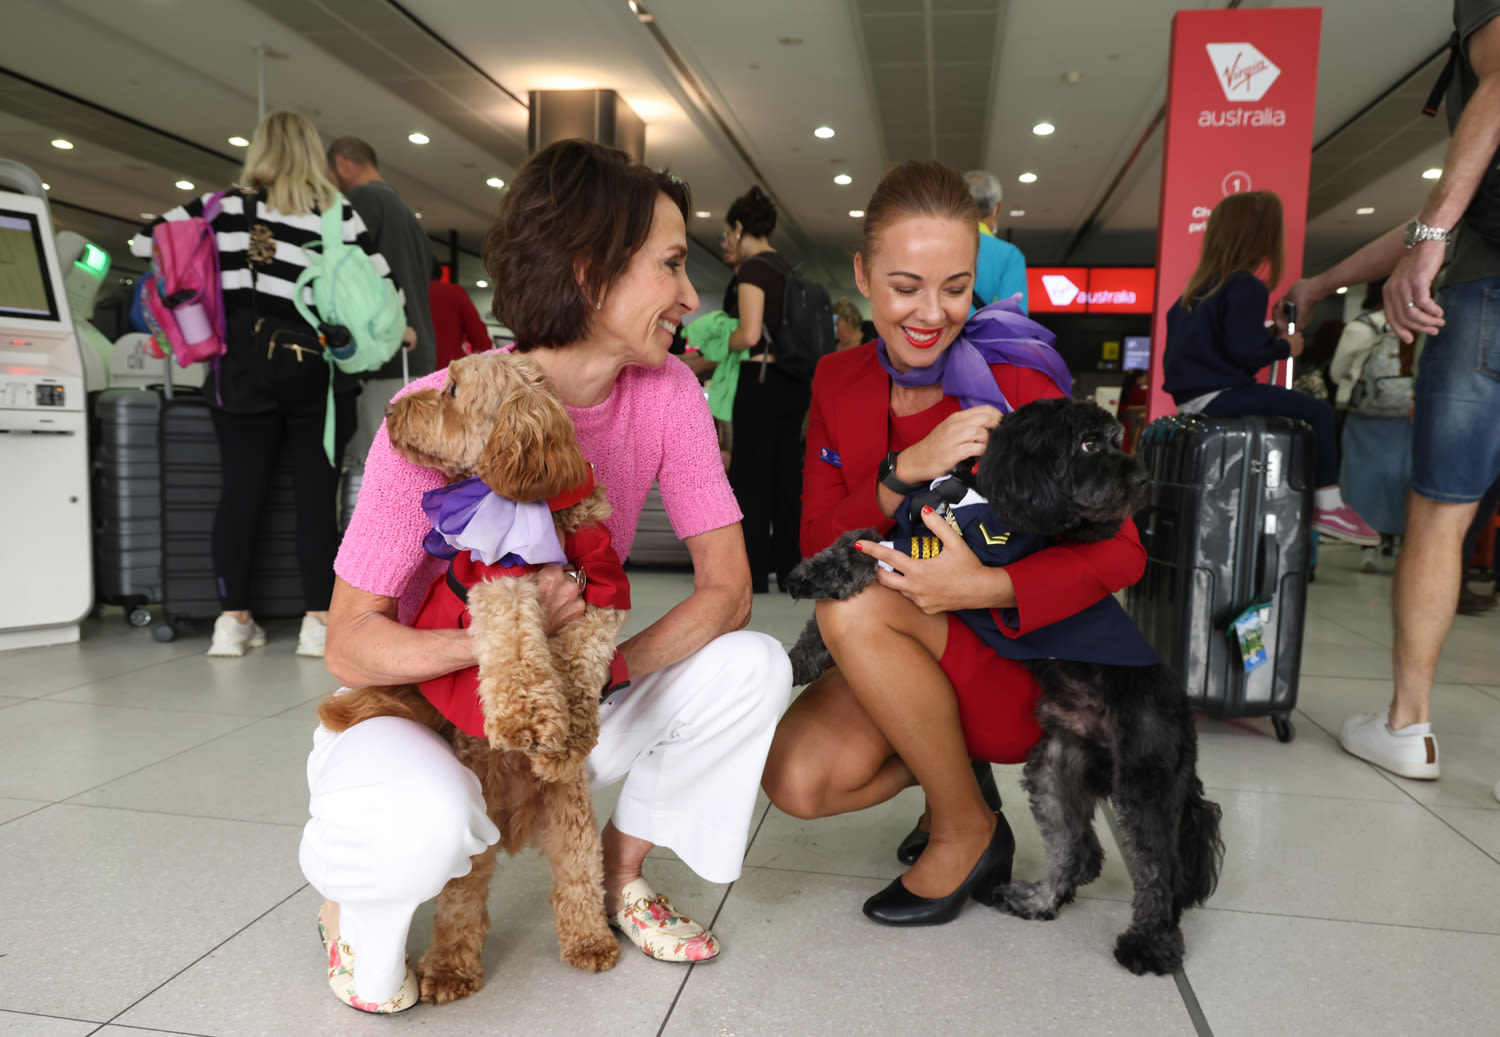 Virgin Australia CEO Jayne Hrdlicka and a Virgin Australia cabin crew member with two dogs dressed in Virgin Australia uniforms at an airport